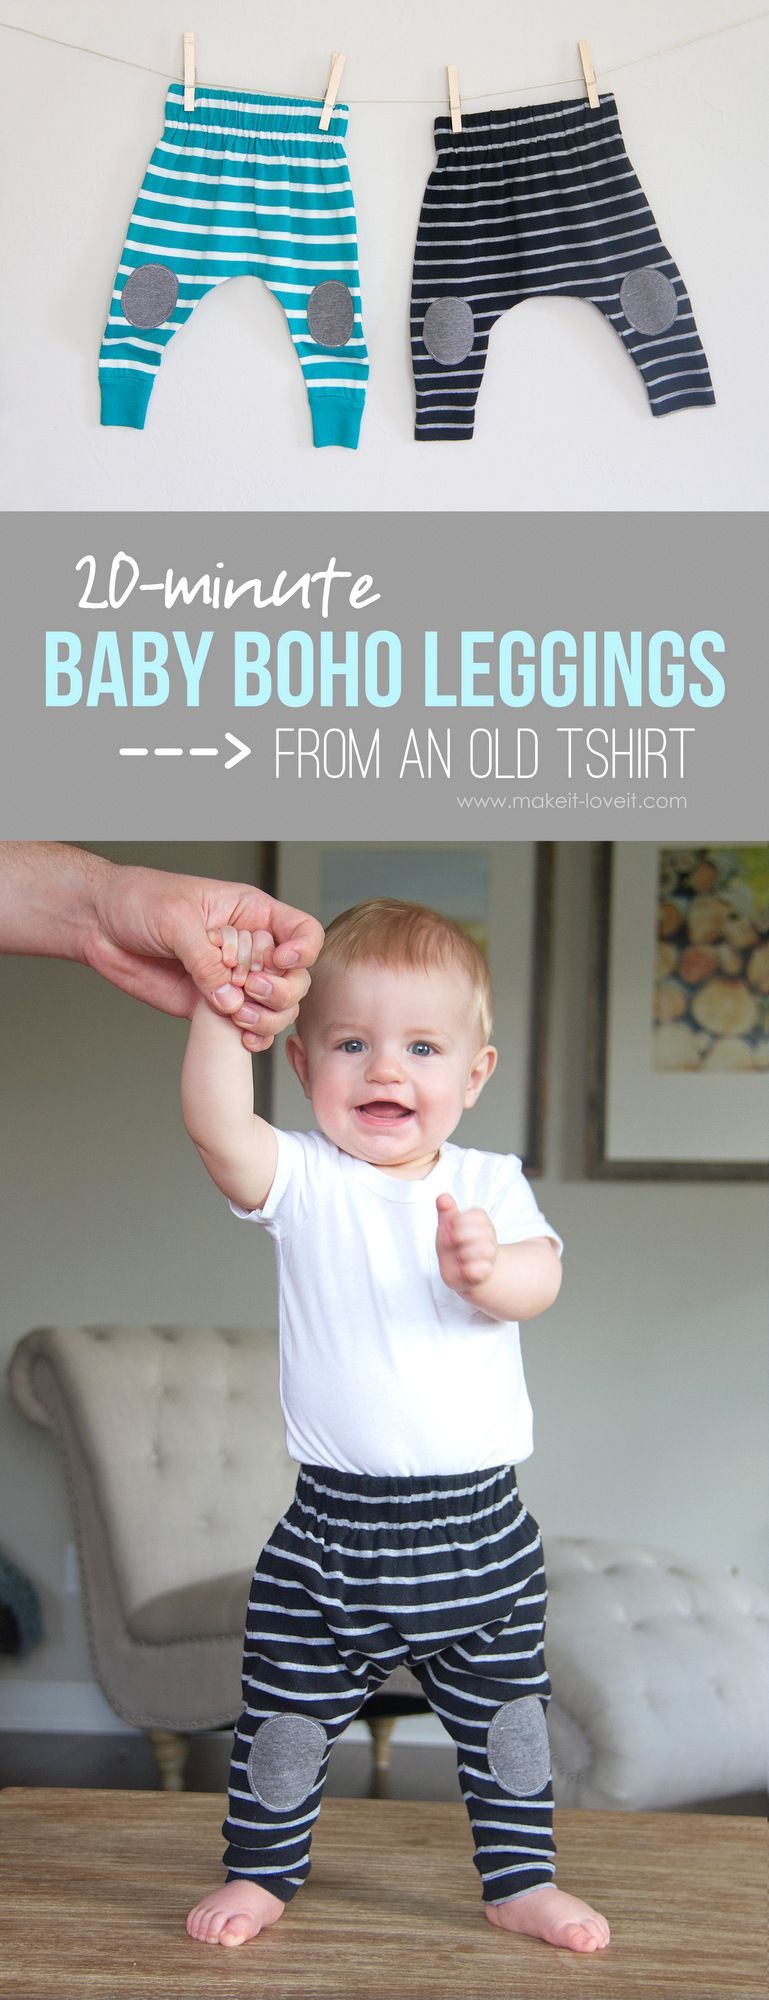 Simple 20-minute Baby Boho Leggings (…from an old Tshirt)!! | via Make It and Love It